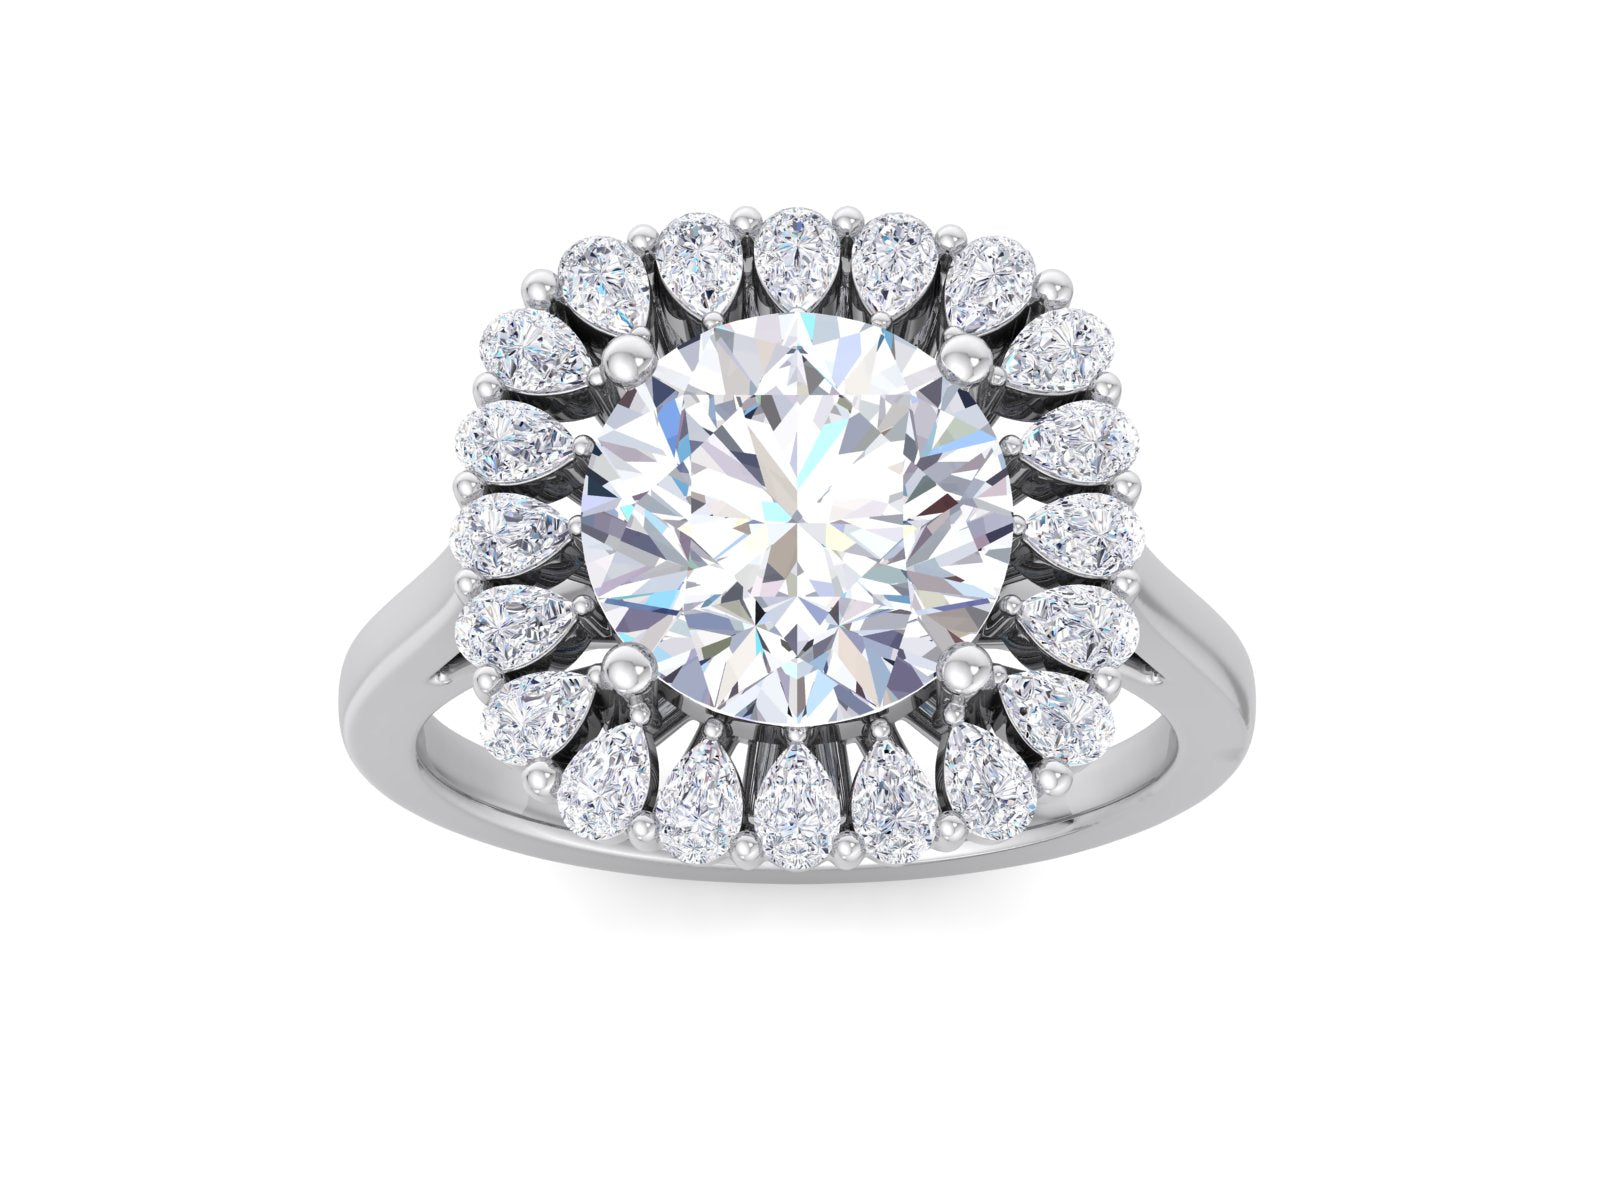 3.80 CT Excellent Cut Round Moissanite Rings, Halo Engagement Rings